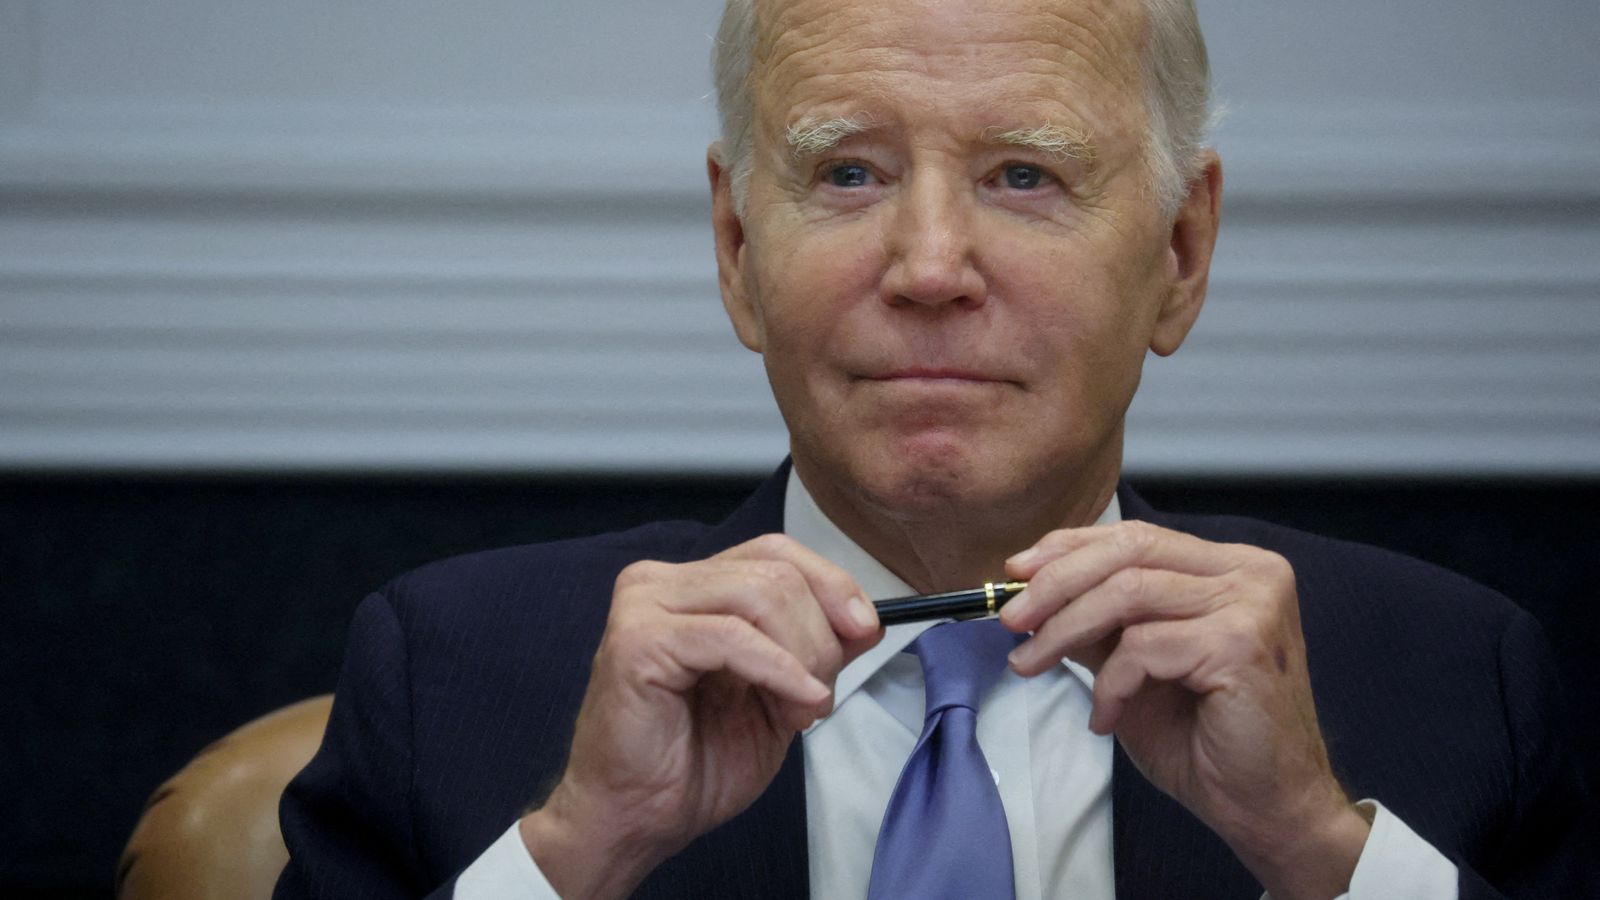 President Joe Biden confirms he will travel to Israel - Page Eight News